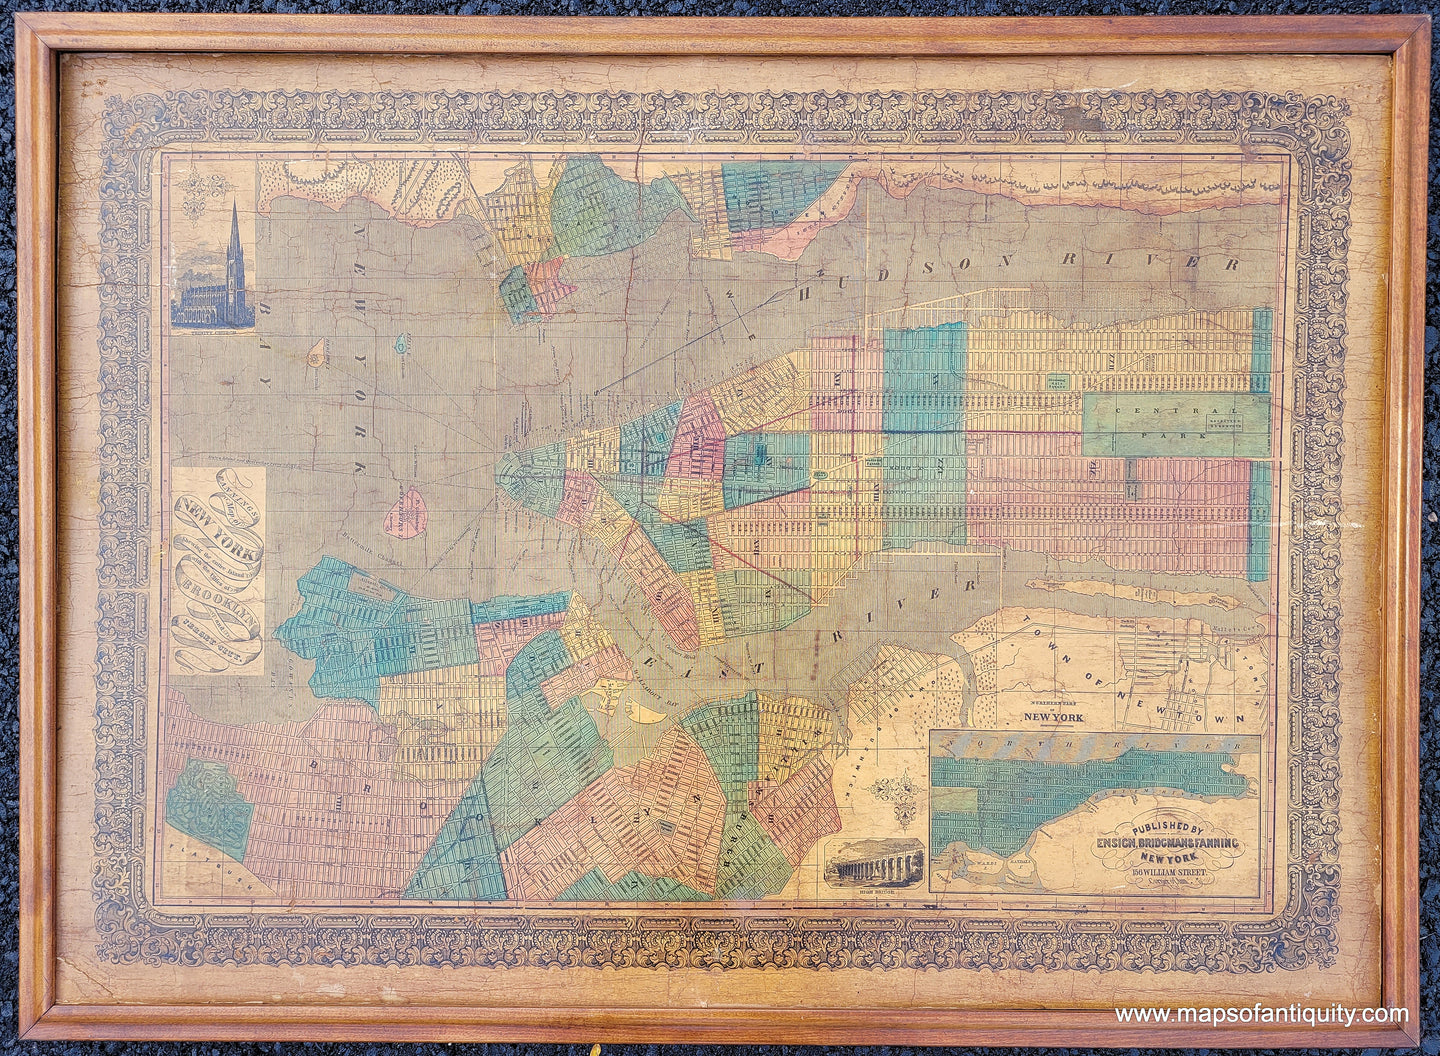 Framed-Genuine-Antique-Map-Fannings-Map-of-New-York-shewing-the-entire-Island-with-the-Cities-of-Brooklyn-and-Jersey-City-1856-Ensign,-Bridgman-&-Fanning-Maps-Of-Antiquity